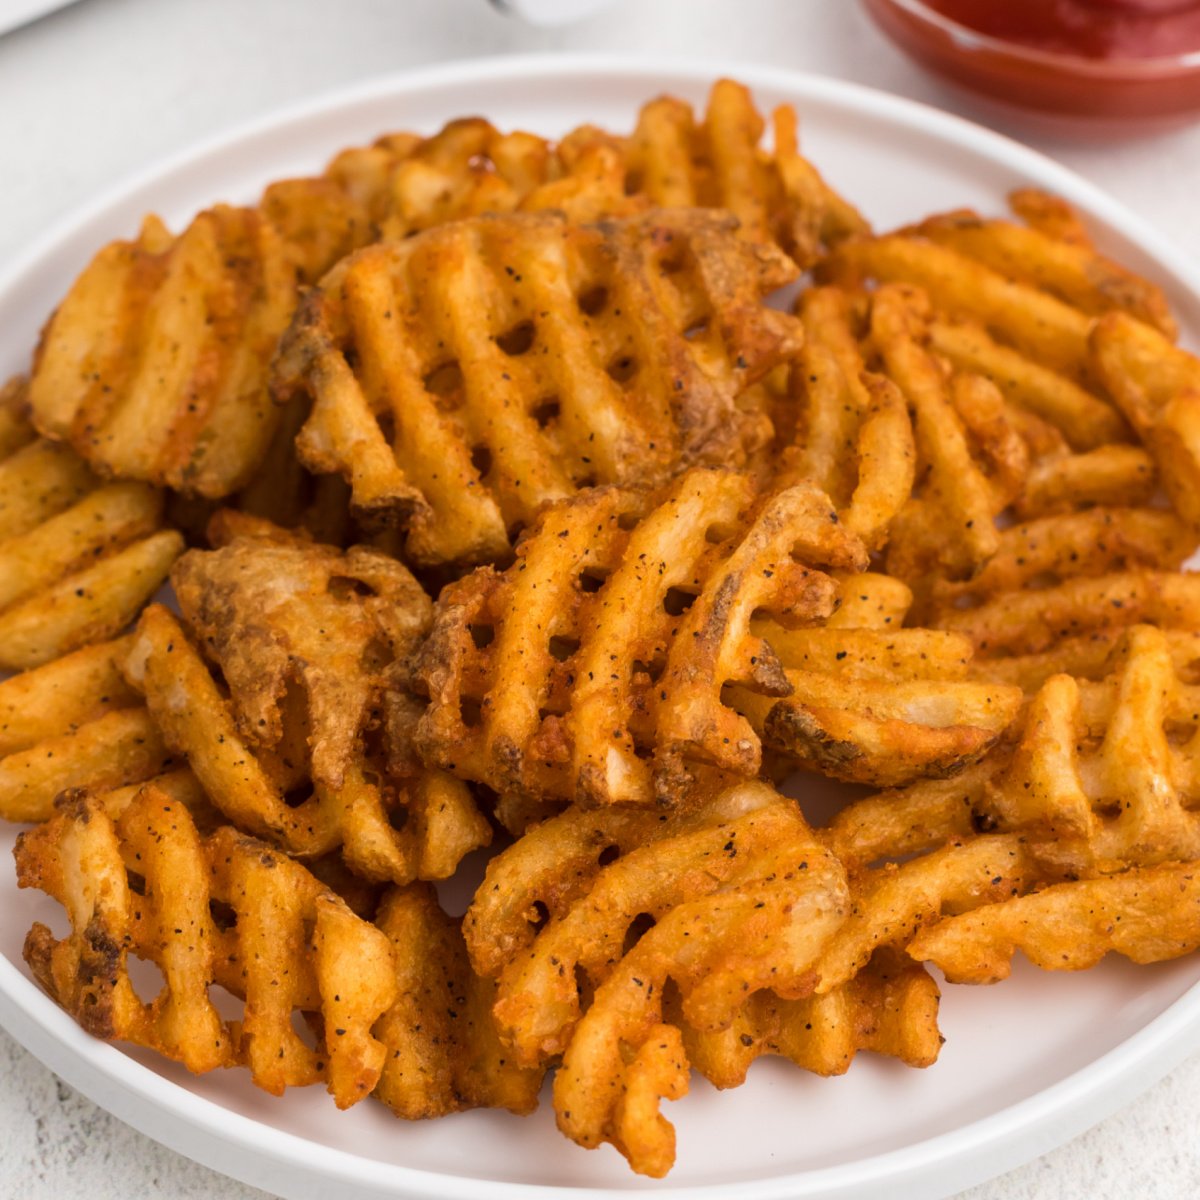 Waffle fries made in the air fryer, served on a white plate.